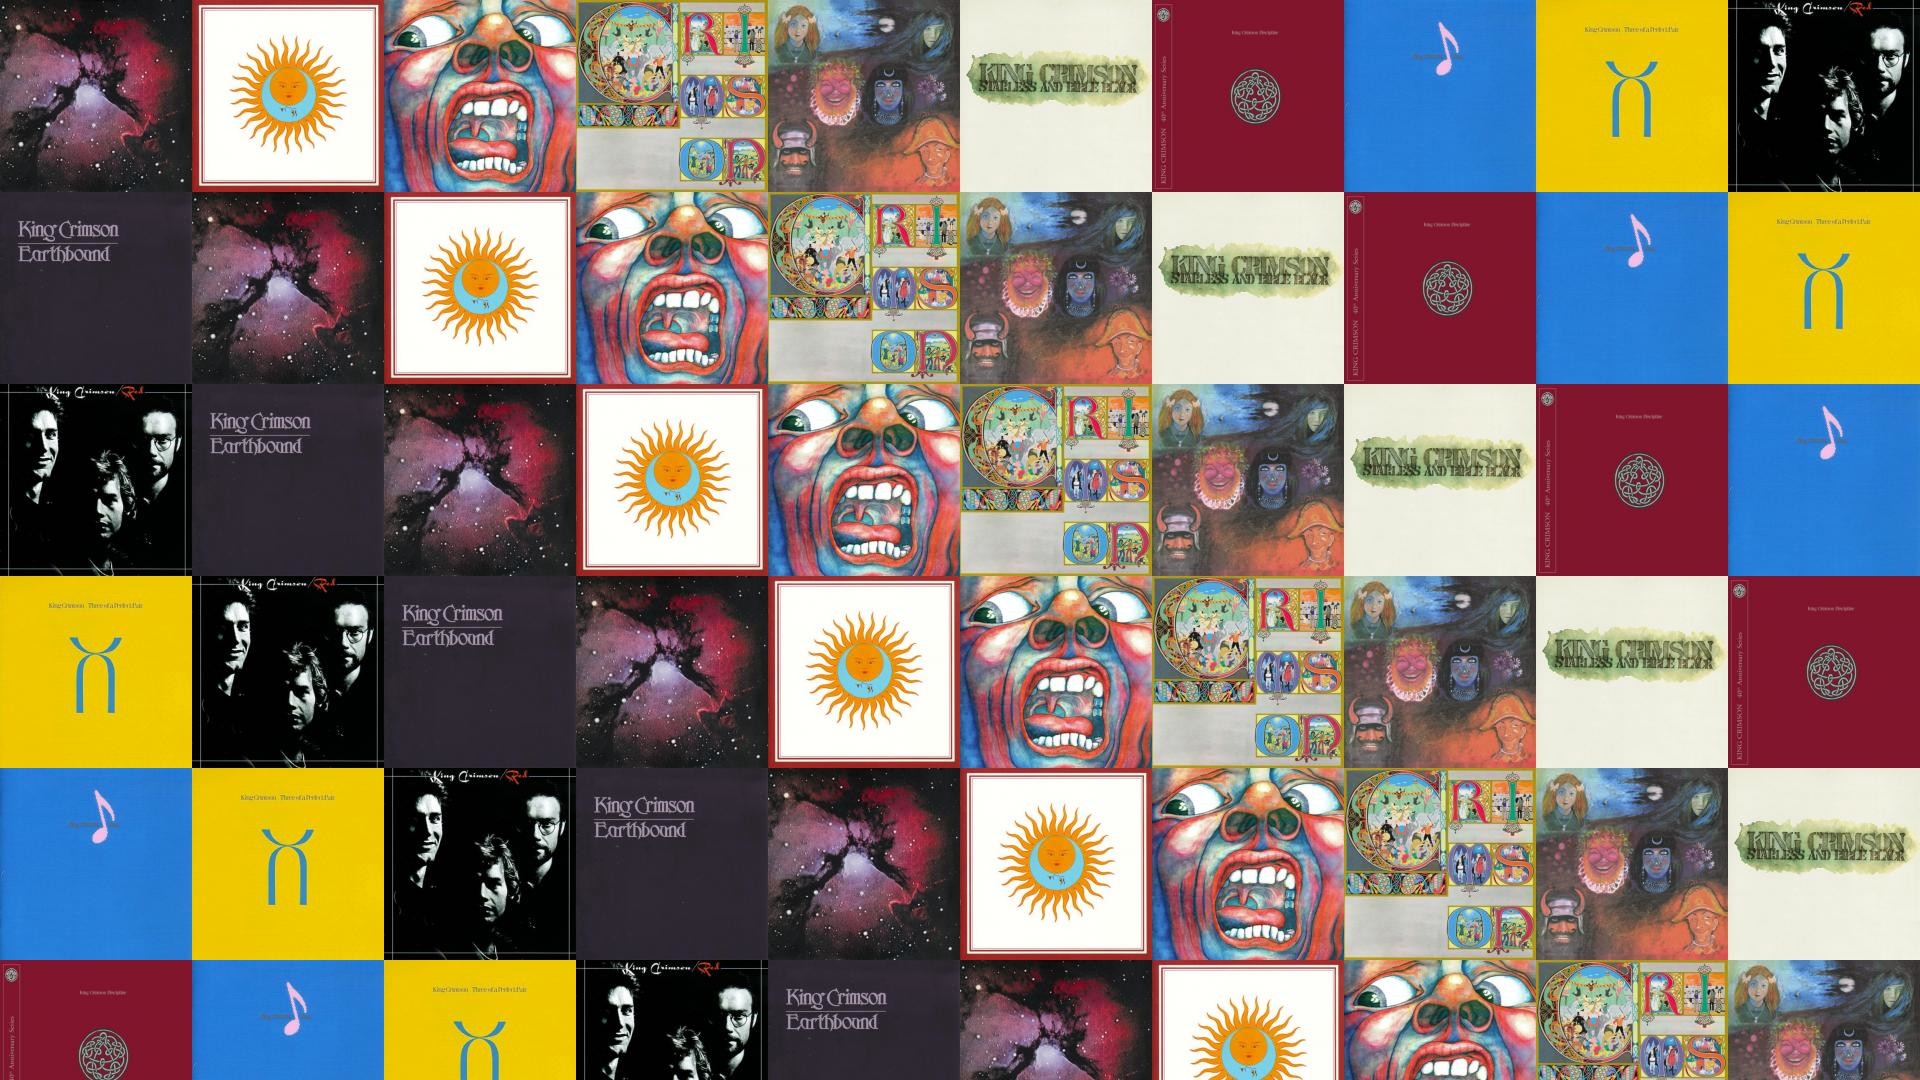 1920x1080 Download this free wallpaper with images of King Crimson – Islands, King  Crimson – Larks Tongues In Aspic, King Crimson – In The Court Of The Crimson  King, ...